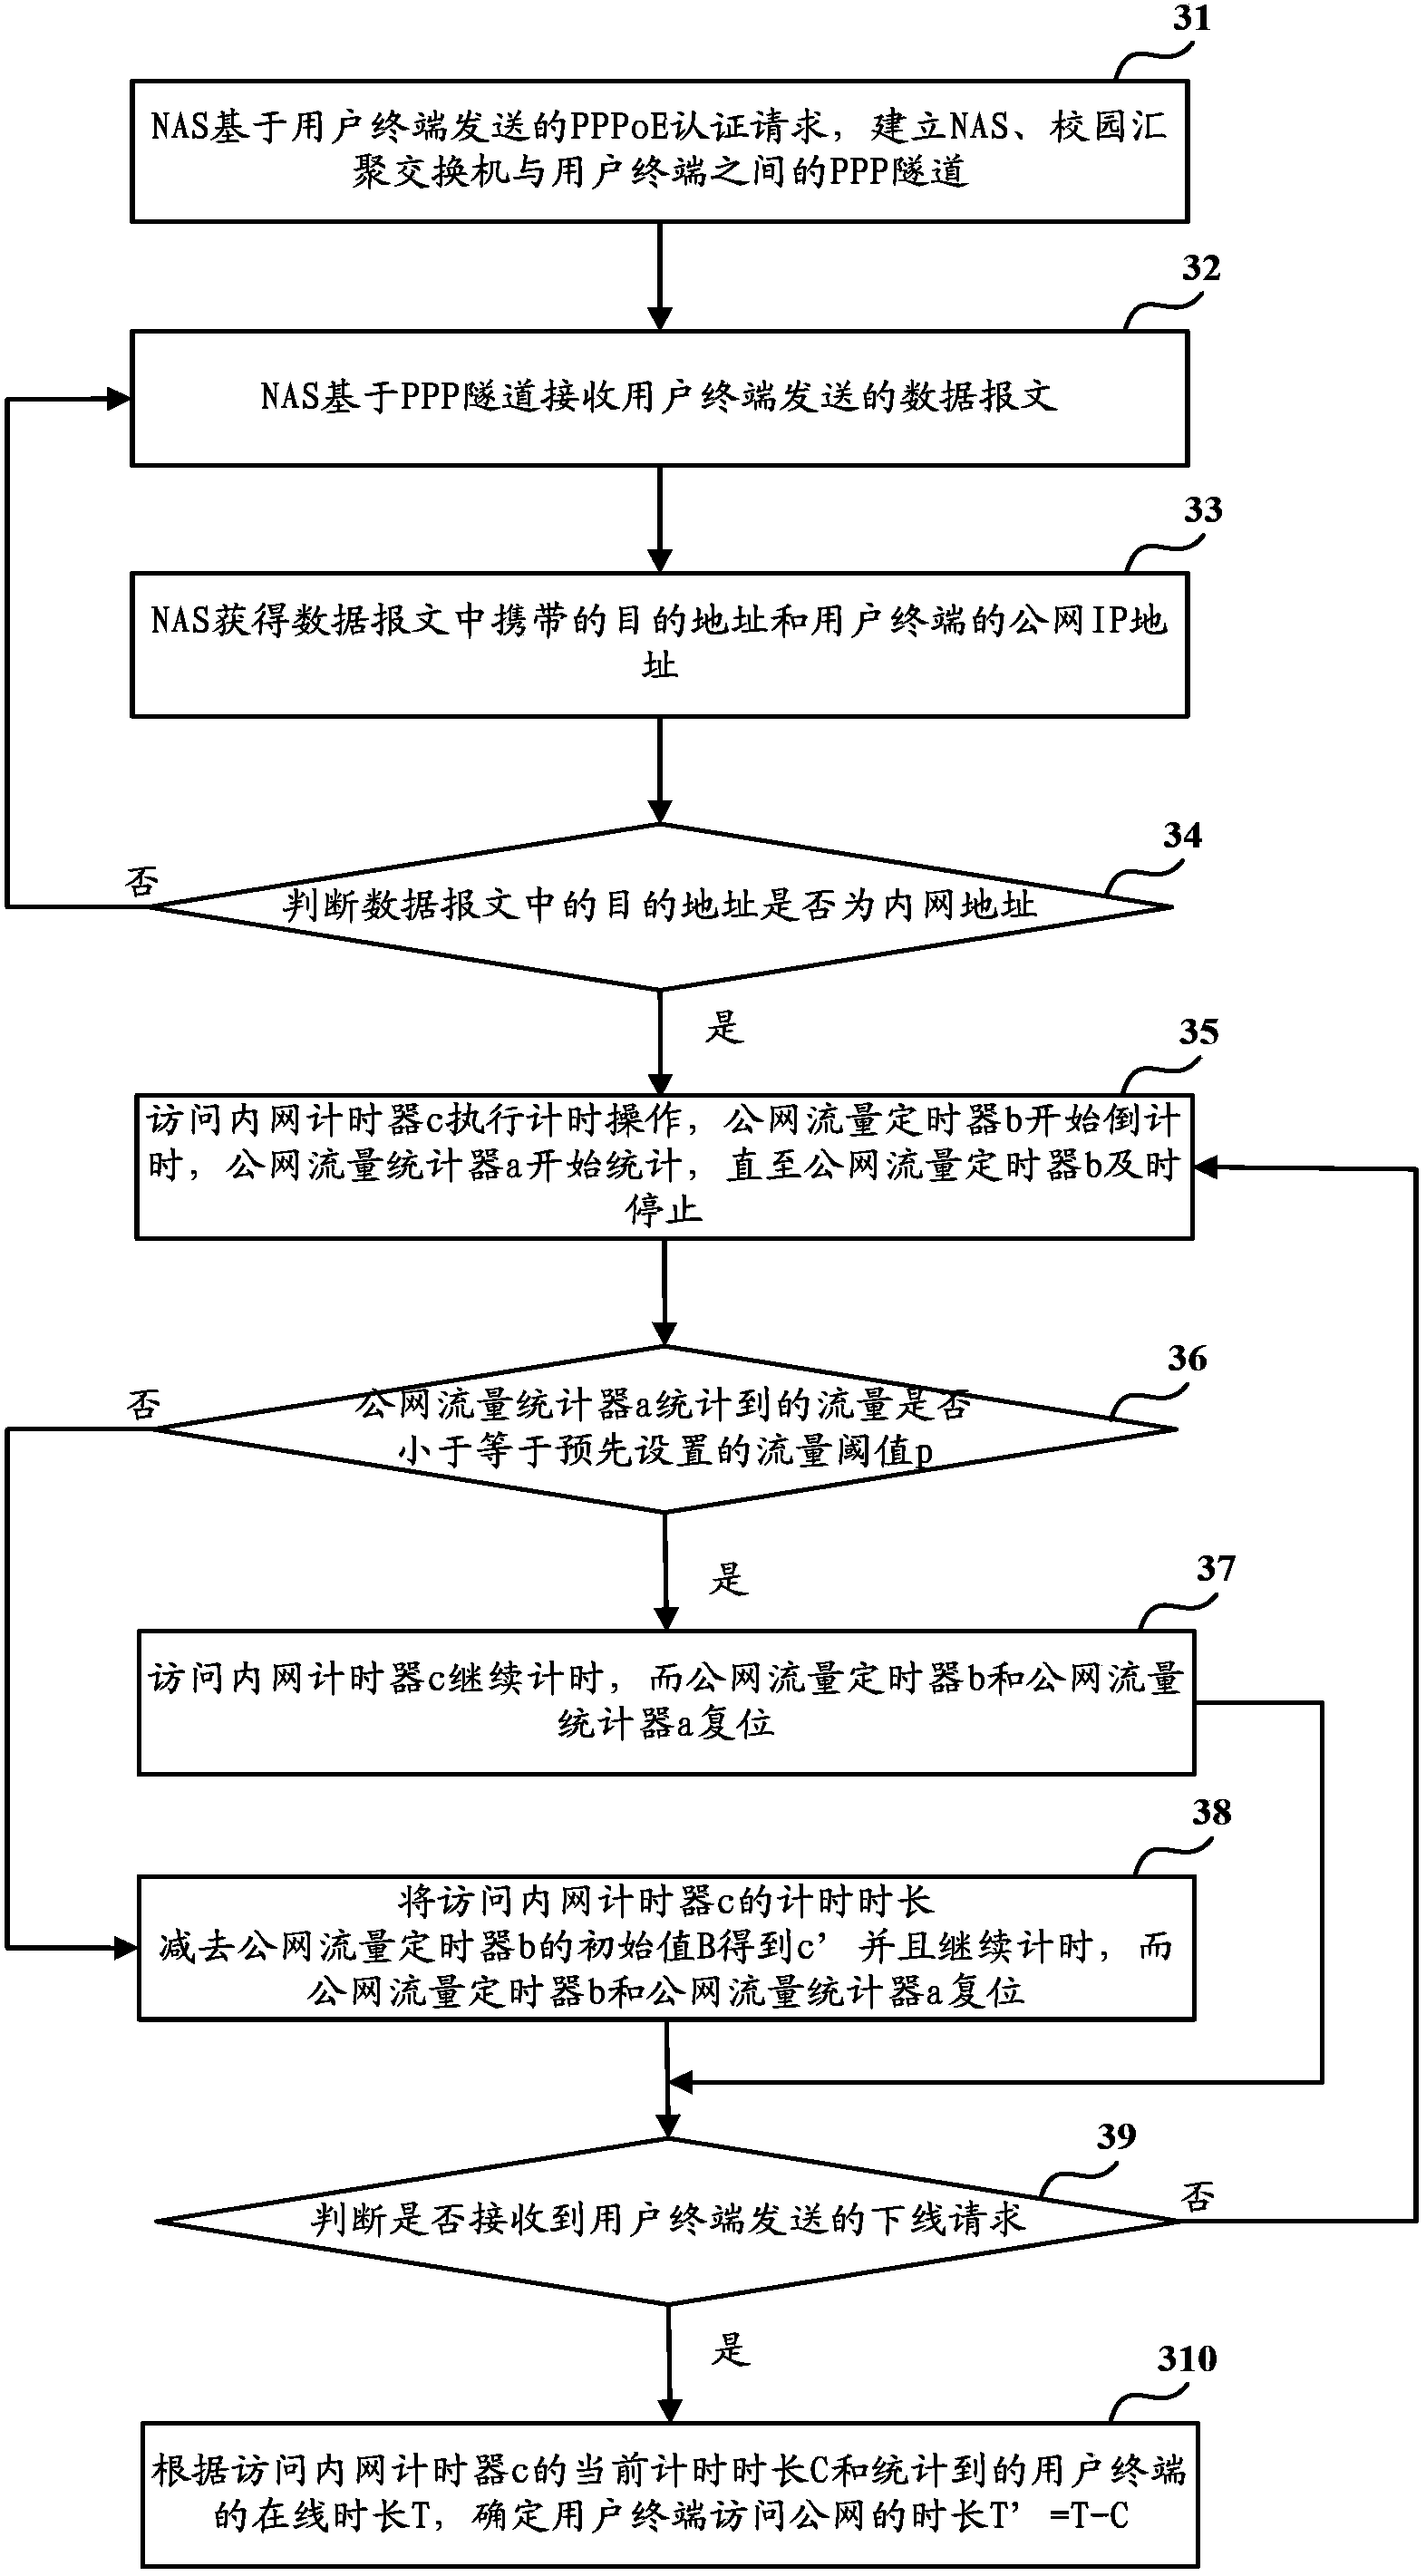 Method for determining duration of public network access by user terminal and net access server